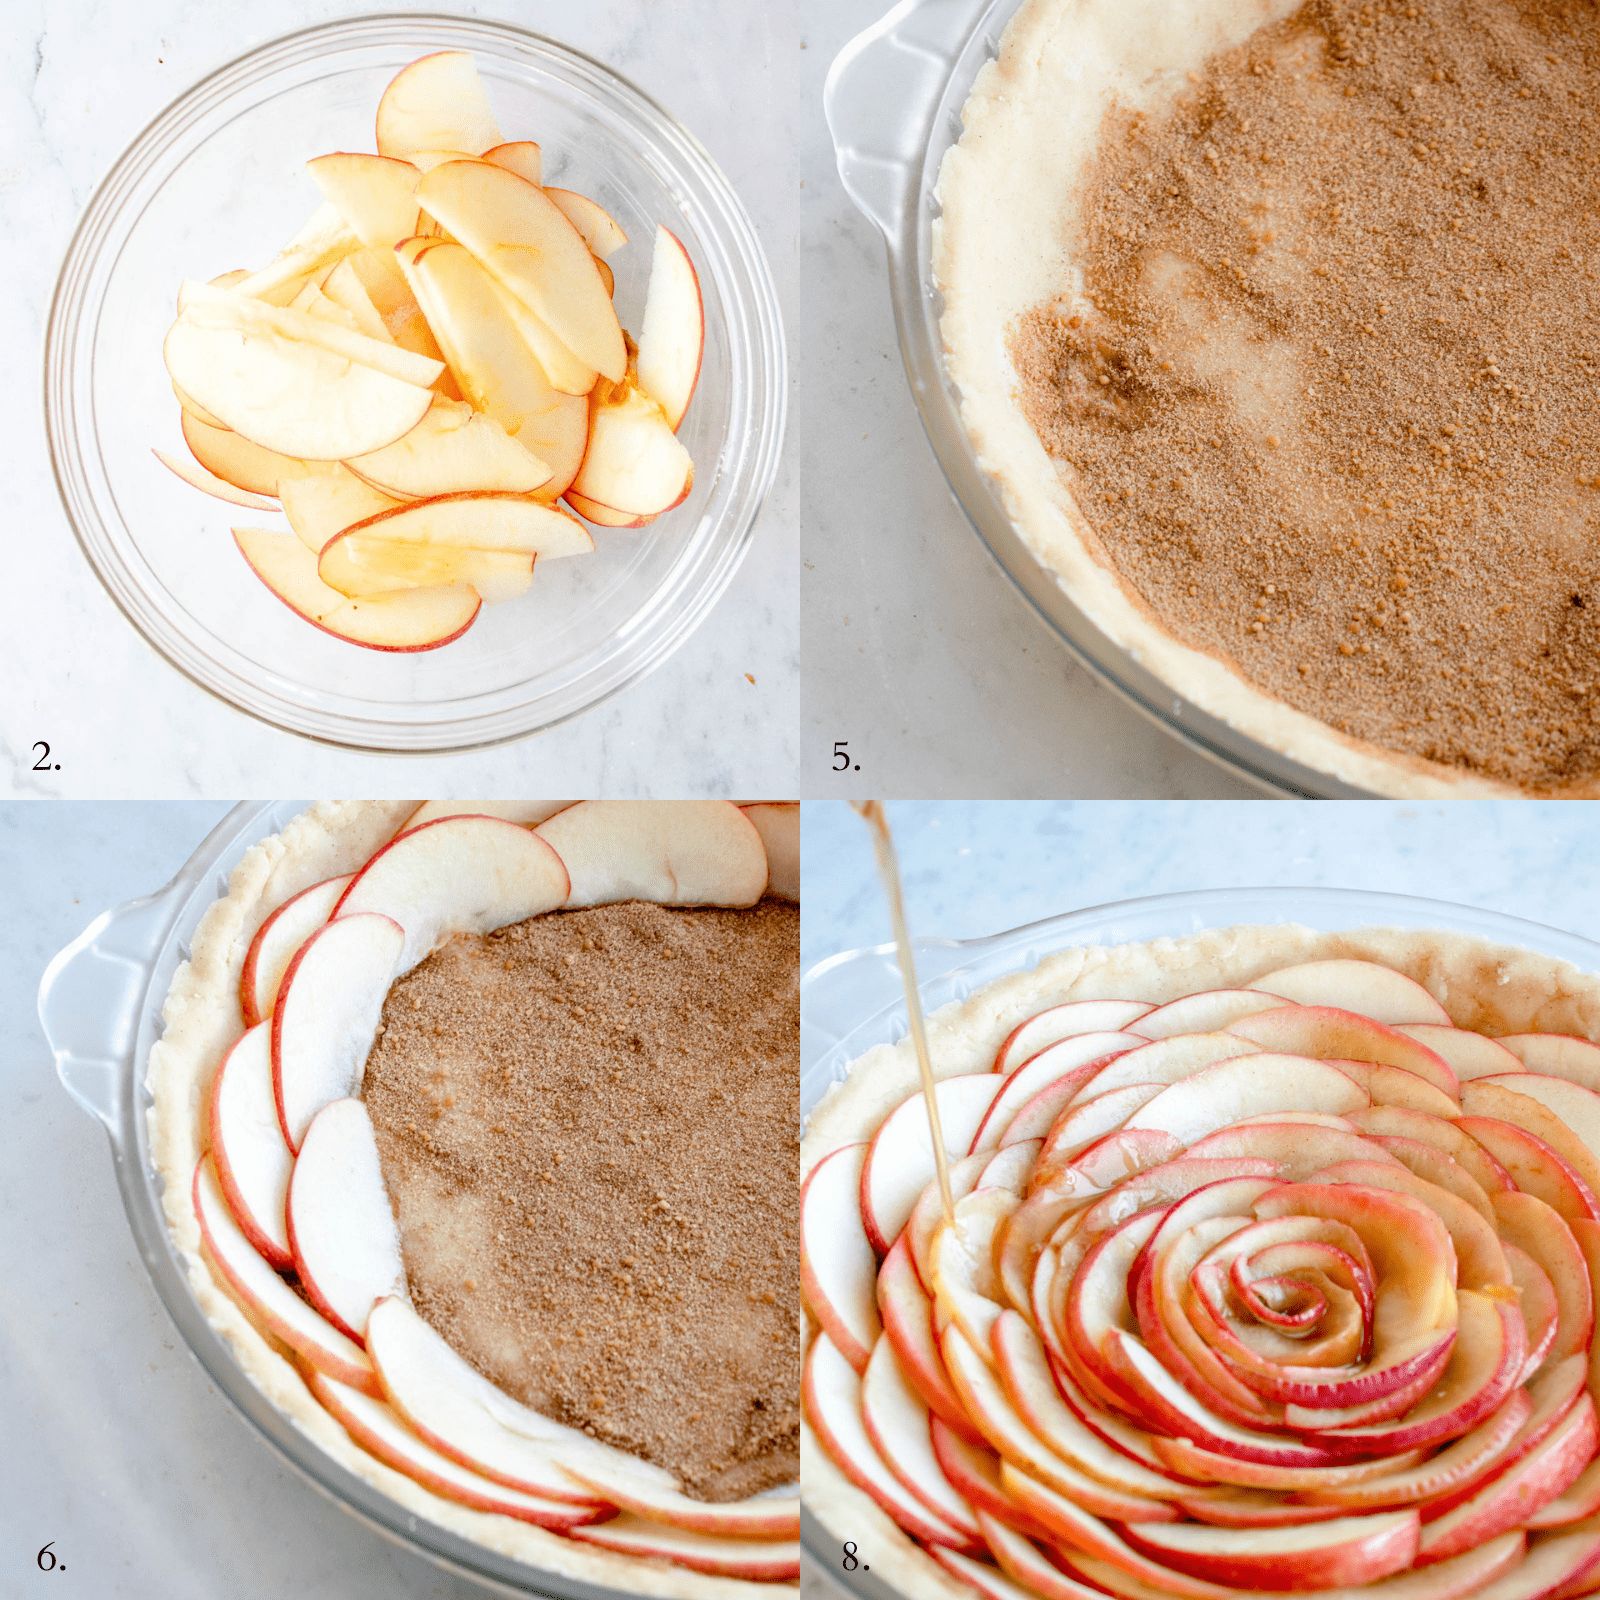 collage of four images. top left image is a clear glass bowl with sliced red apples, top right image is a par baked pie crust lined with cinnamon sugar, bottom left image is the pie crust lined with cinnamon sugar and two concentric circular rows of half moon sliced apples and the image on the bottom right is the same tart fully packed with apple slices with a maple glaze being drizzled on top